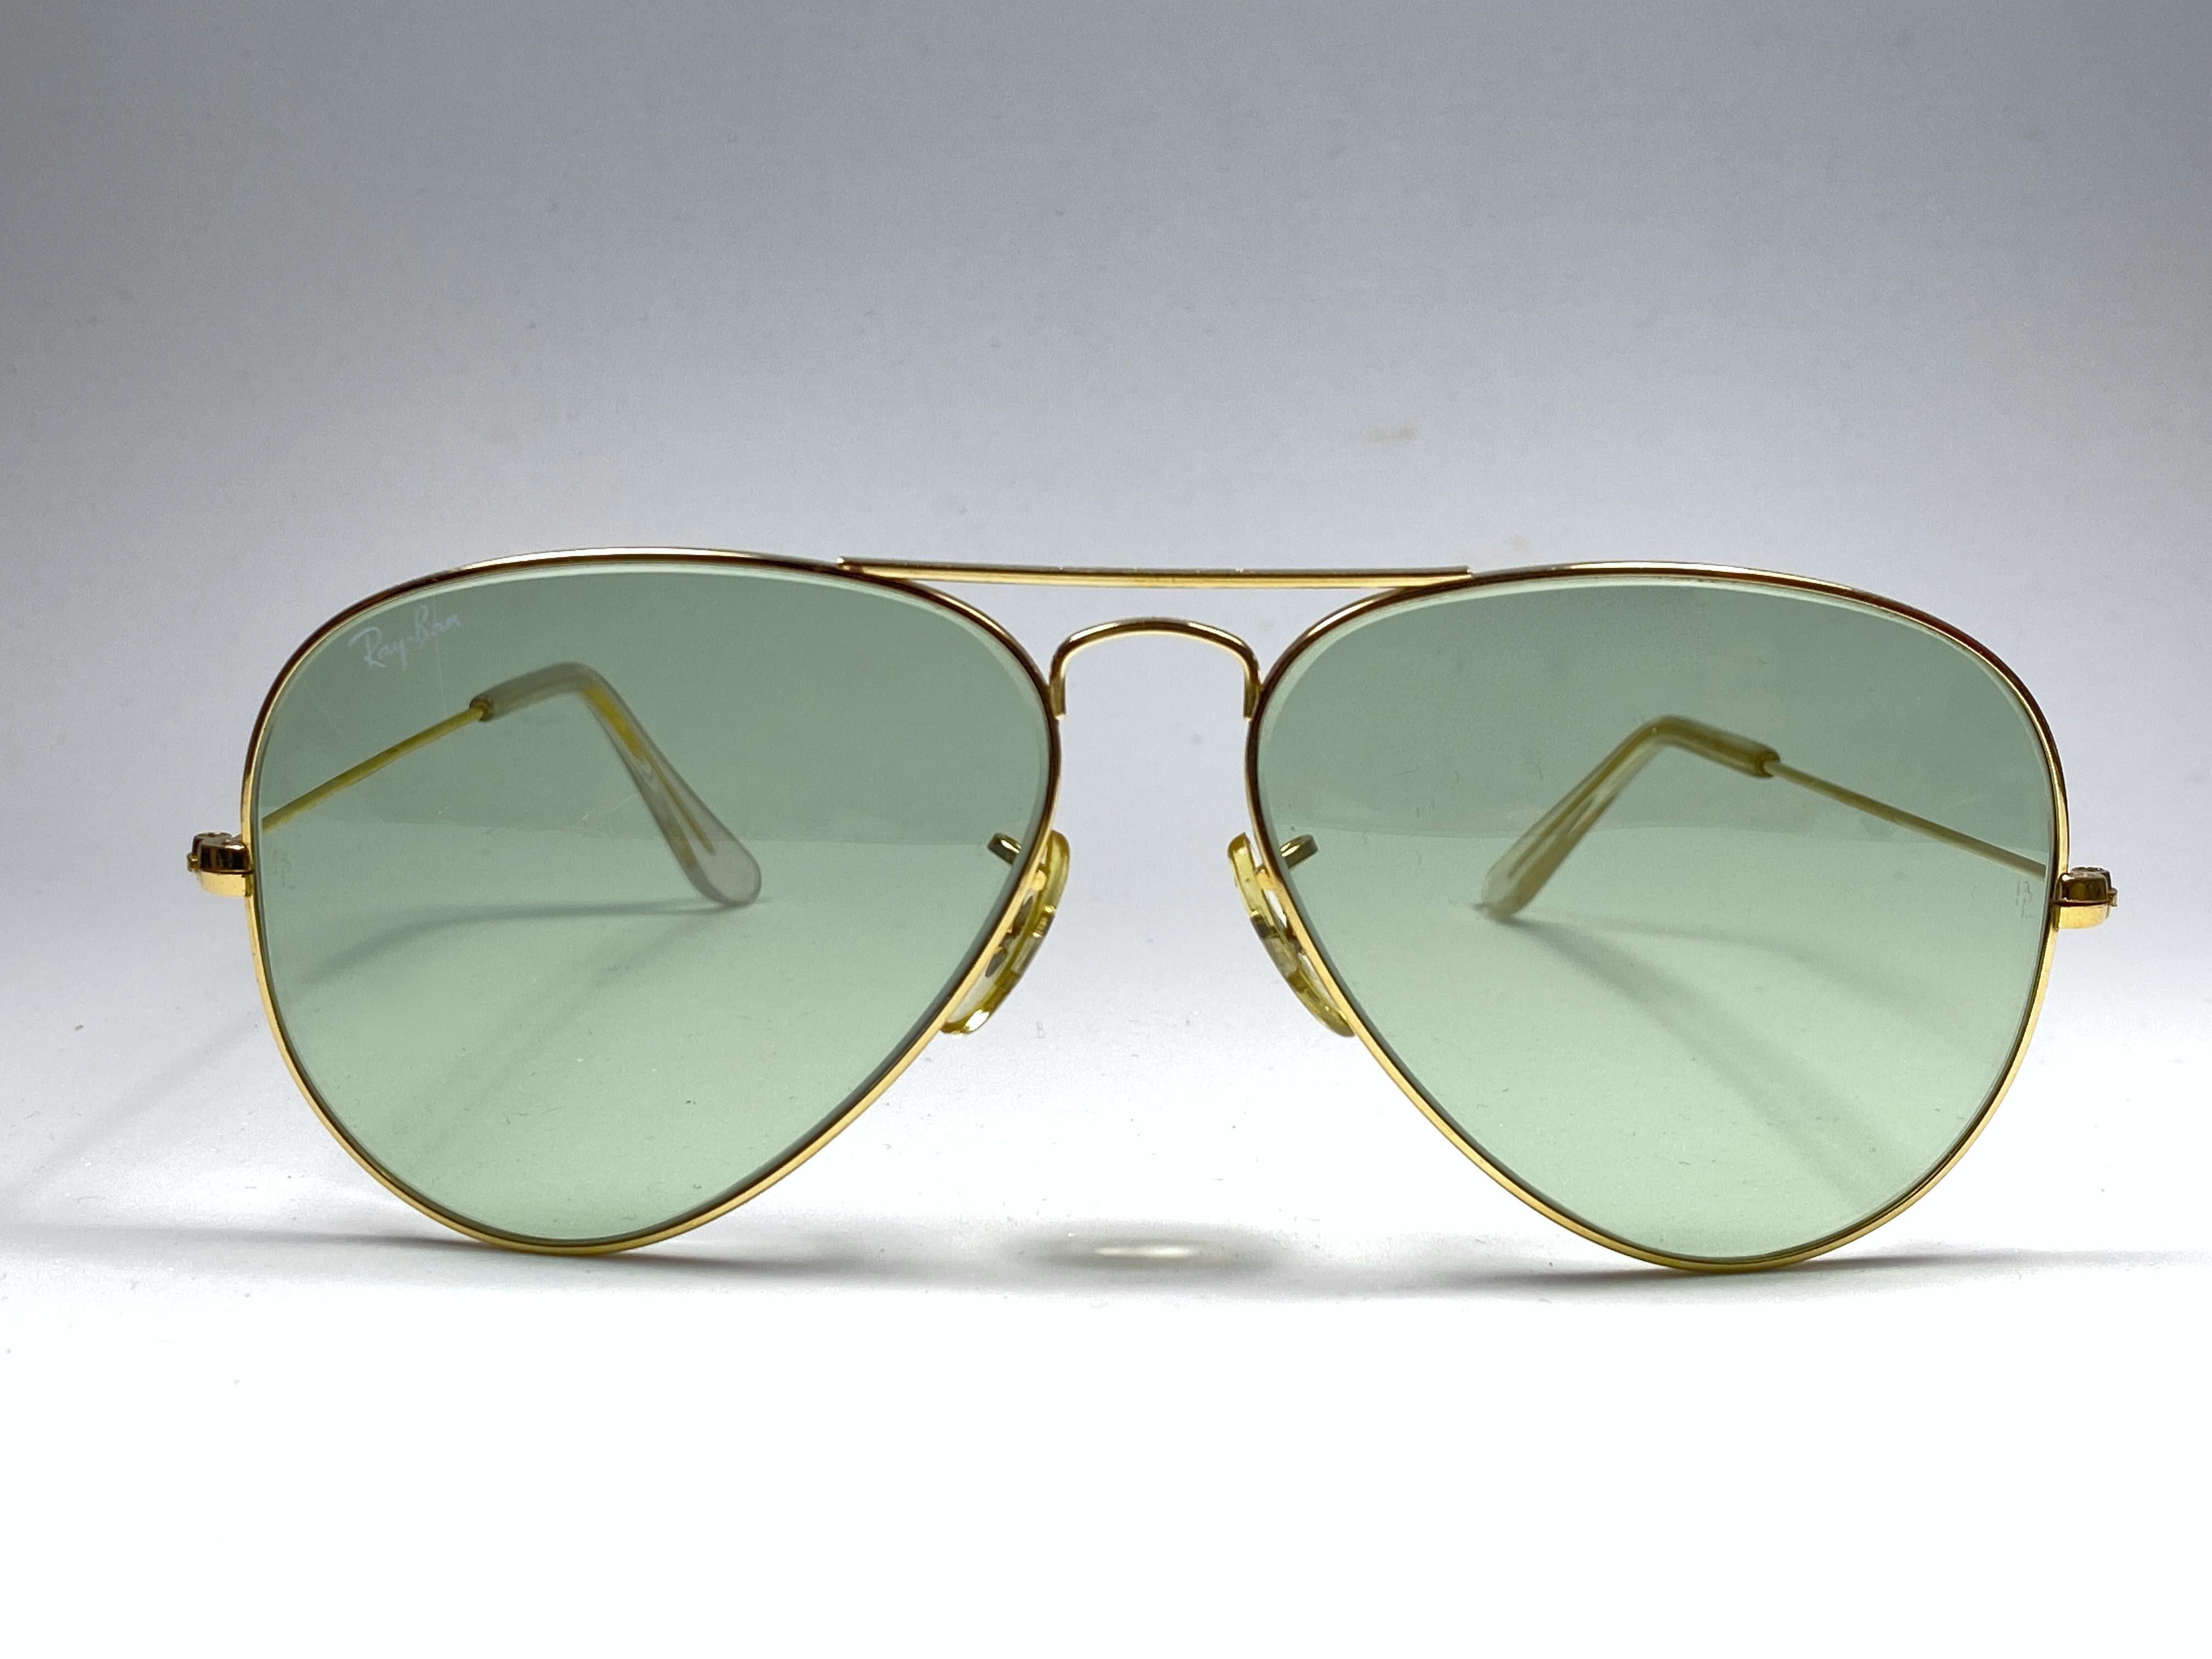 Vintage Ray Ban Aviator gold 58MM with RB3 Green Lenses.


Light sign of wear due to storage. Original Ray Ban B&L case.

FRONT : 13.5 CMS

LENS HEIGHT : 5 CMS

LENS WIDTH : 6.2 CMS